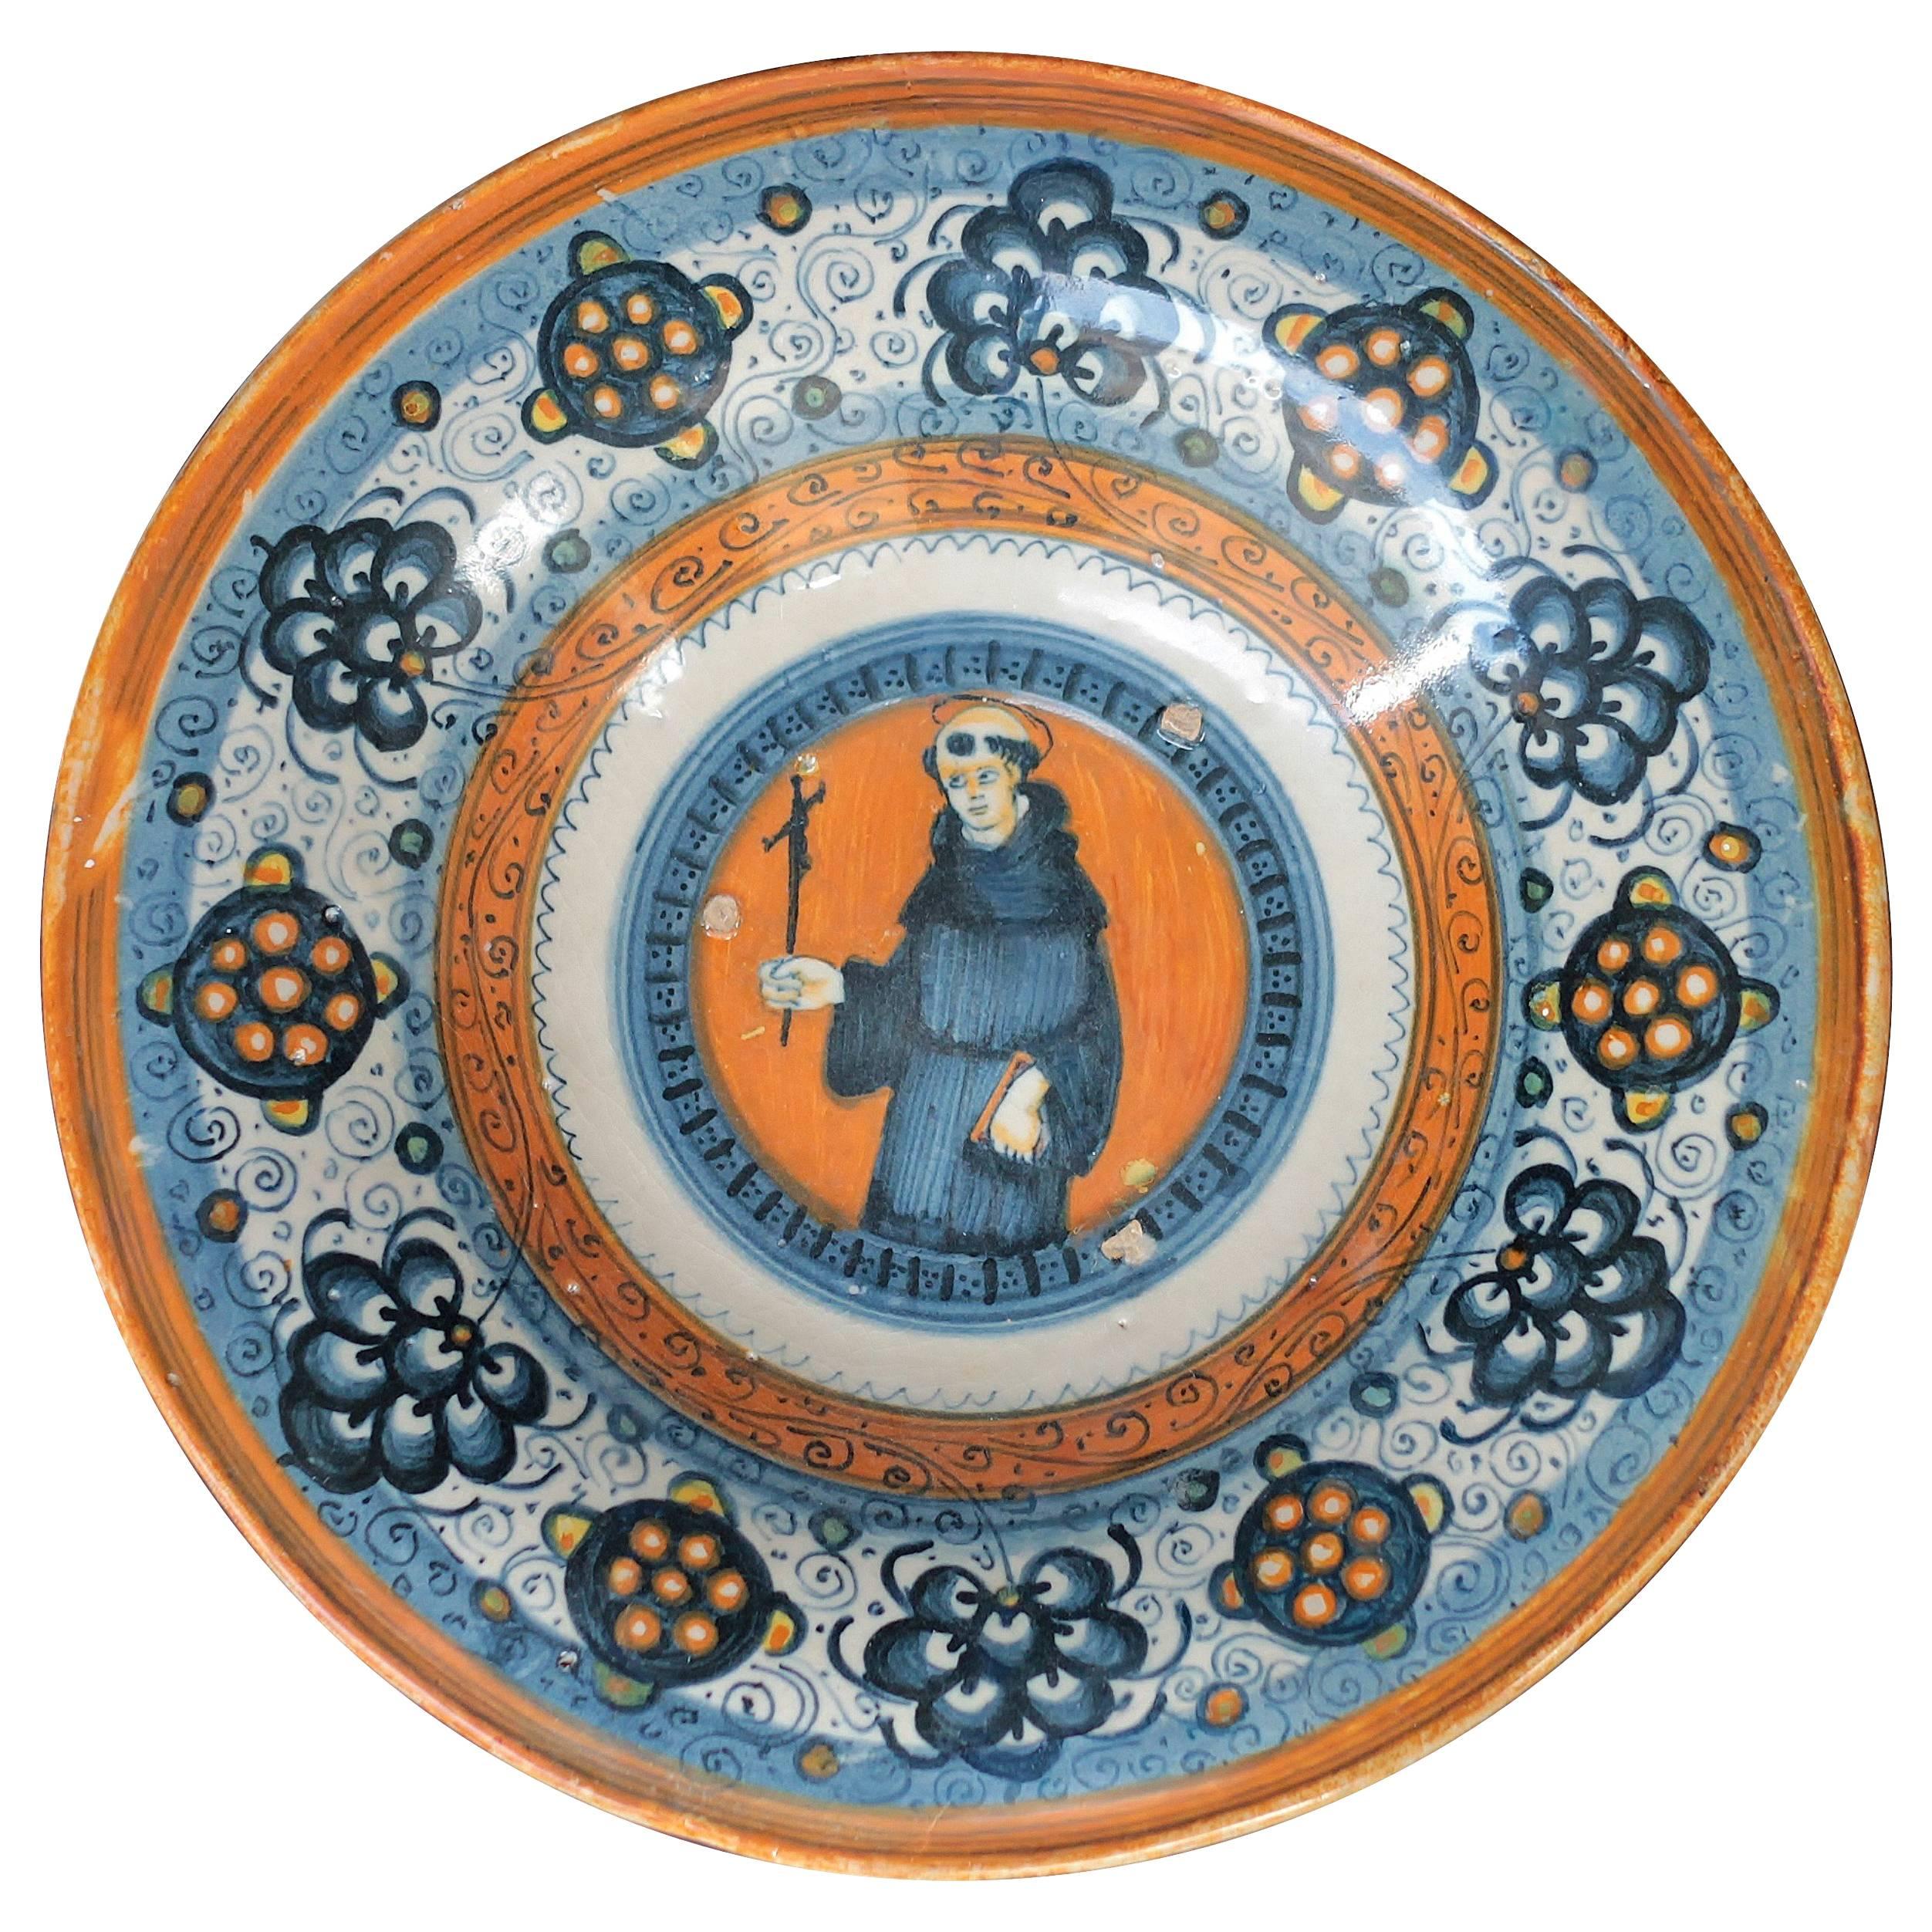 Montelupo "Tondino" in Faience with a Clergyman and Persian Palmette, circa 1520 For Sale